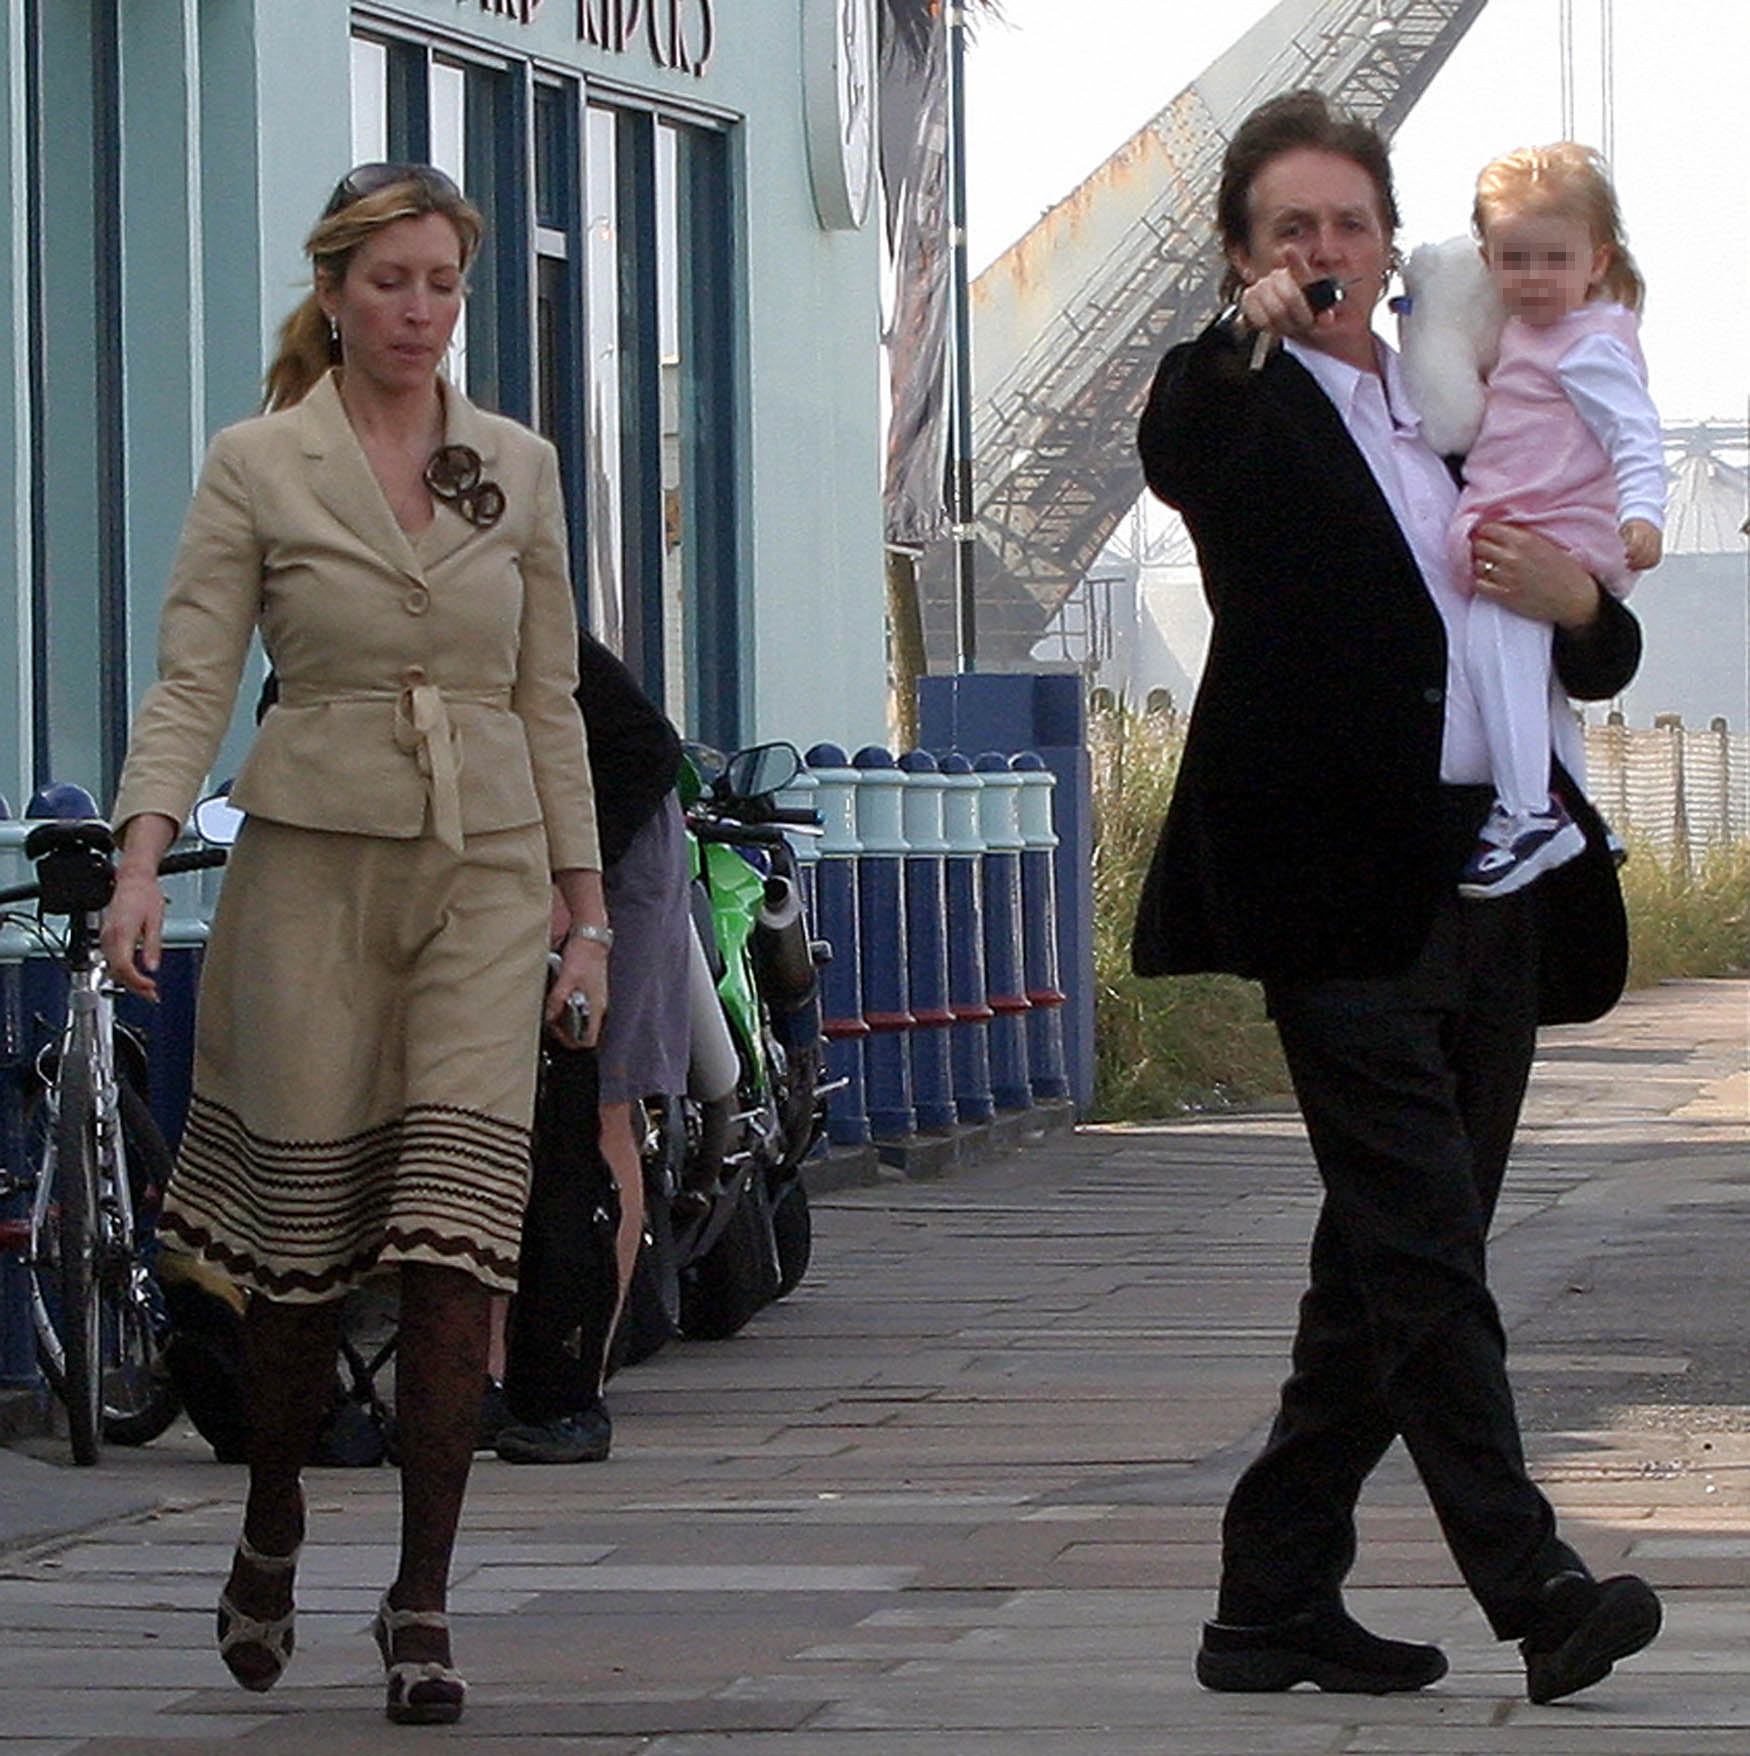 Heather Mills, Paul McCartney, and Beatrice McCartney taking a walk after lunch on July 19, 2011 | Source: Getty Images